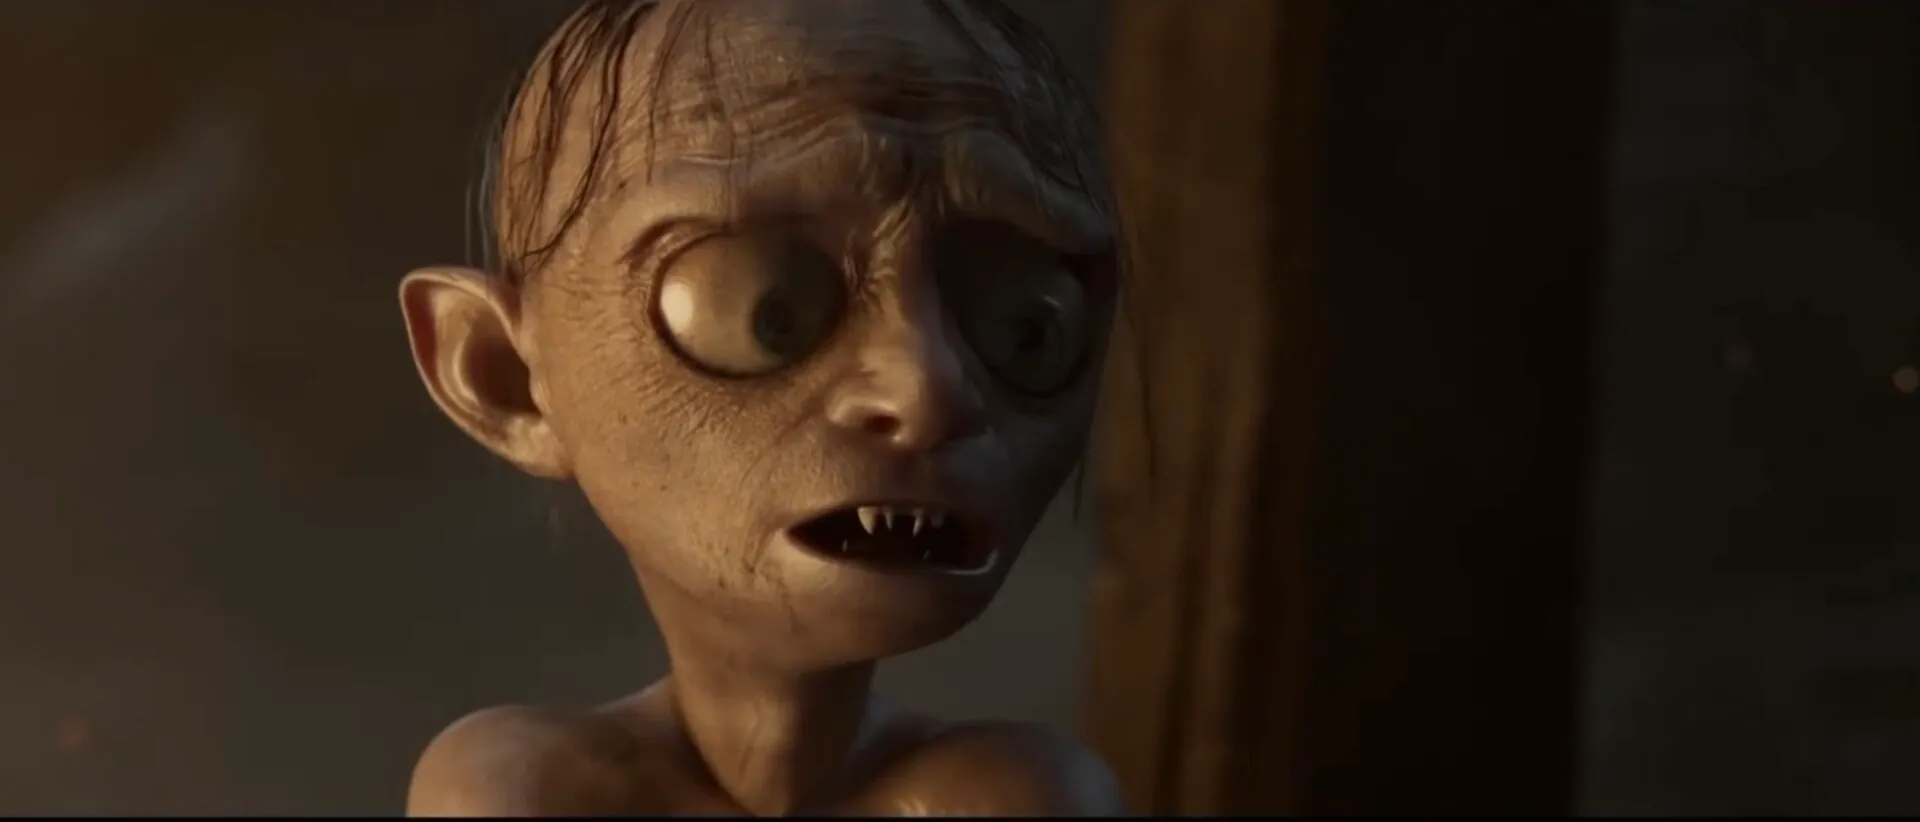 The Lord of the Rings: Gollum: release date, trailers, gameplay, and more